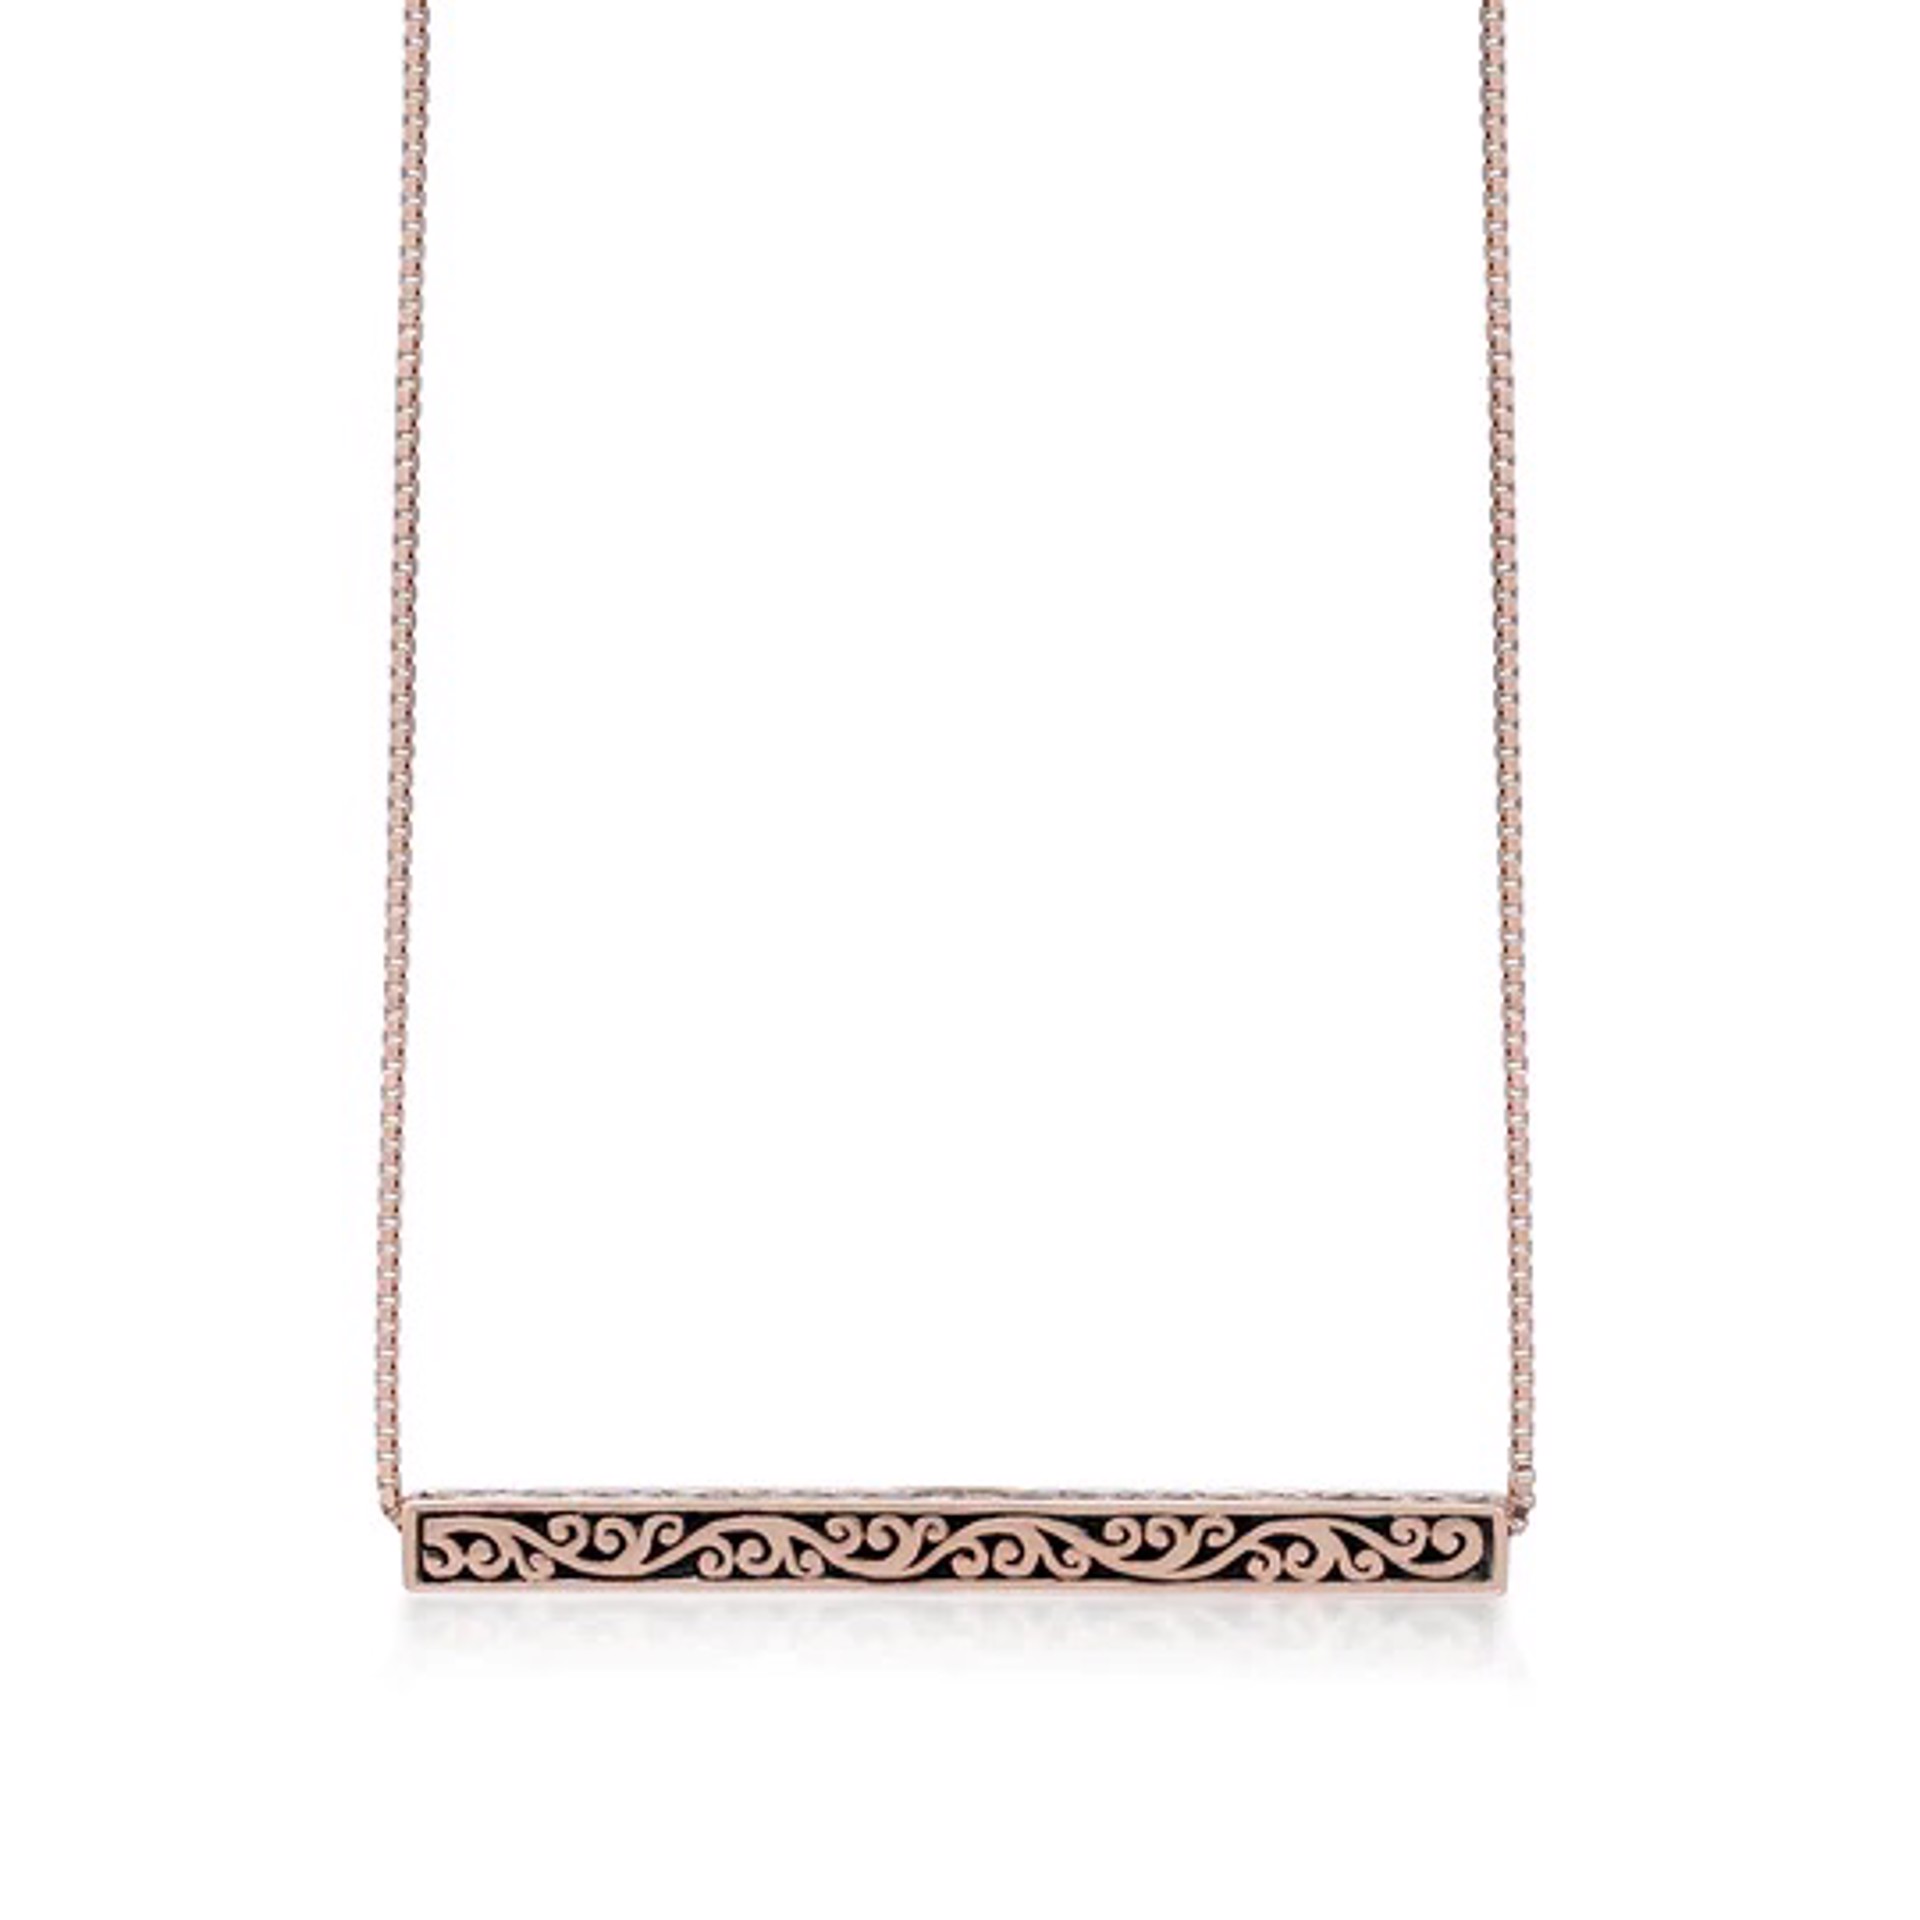 1013 18K Rose Gold with Lois Hill Intricate Scroll Bar Necklace (30mm*3mm).  (SO) by Lois Hill